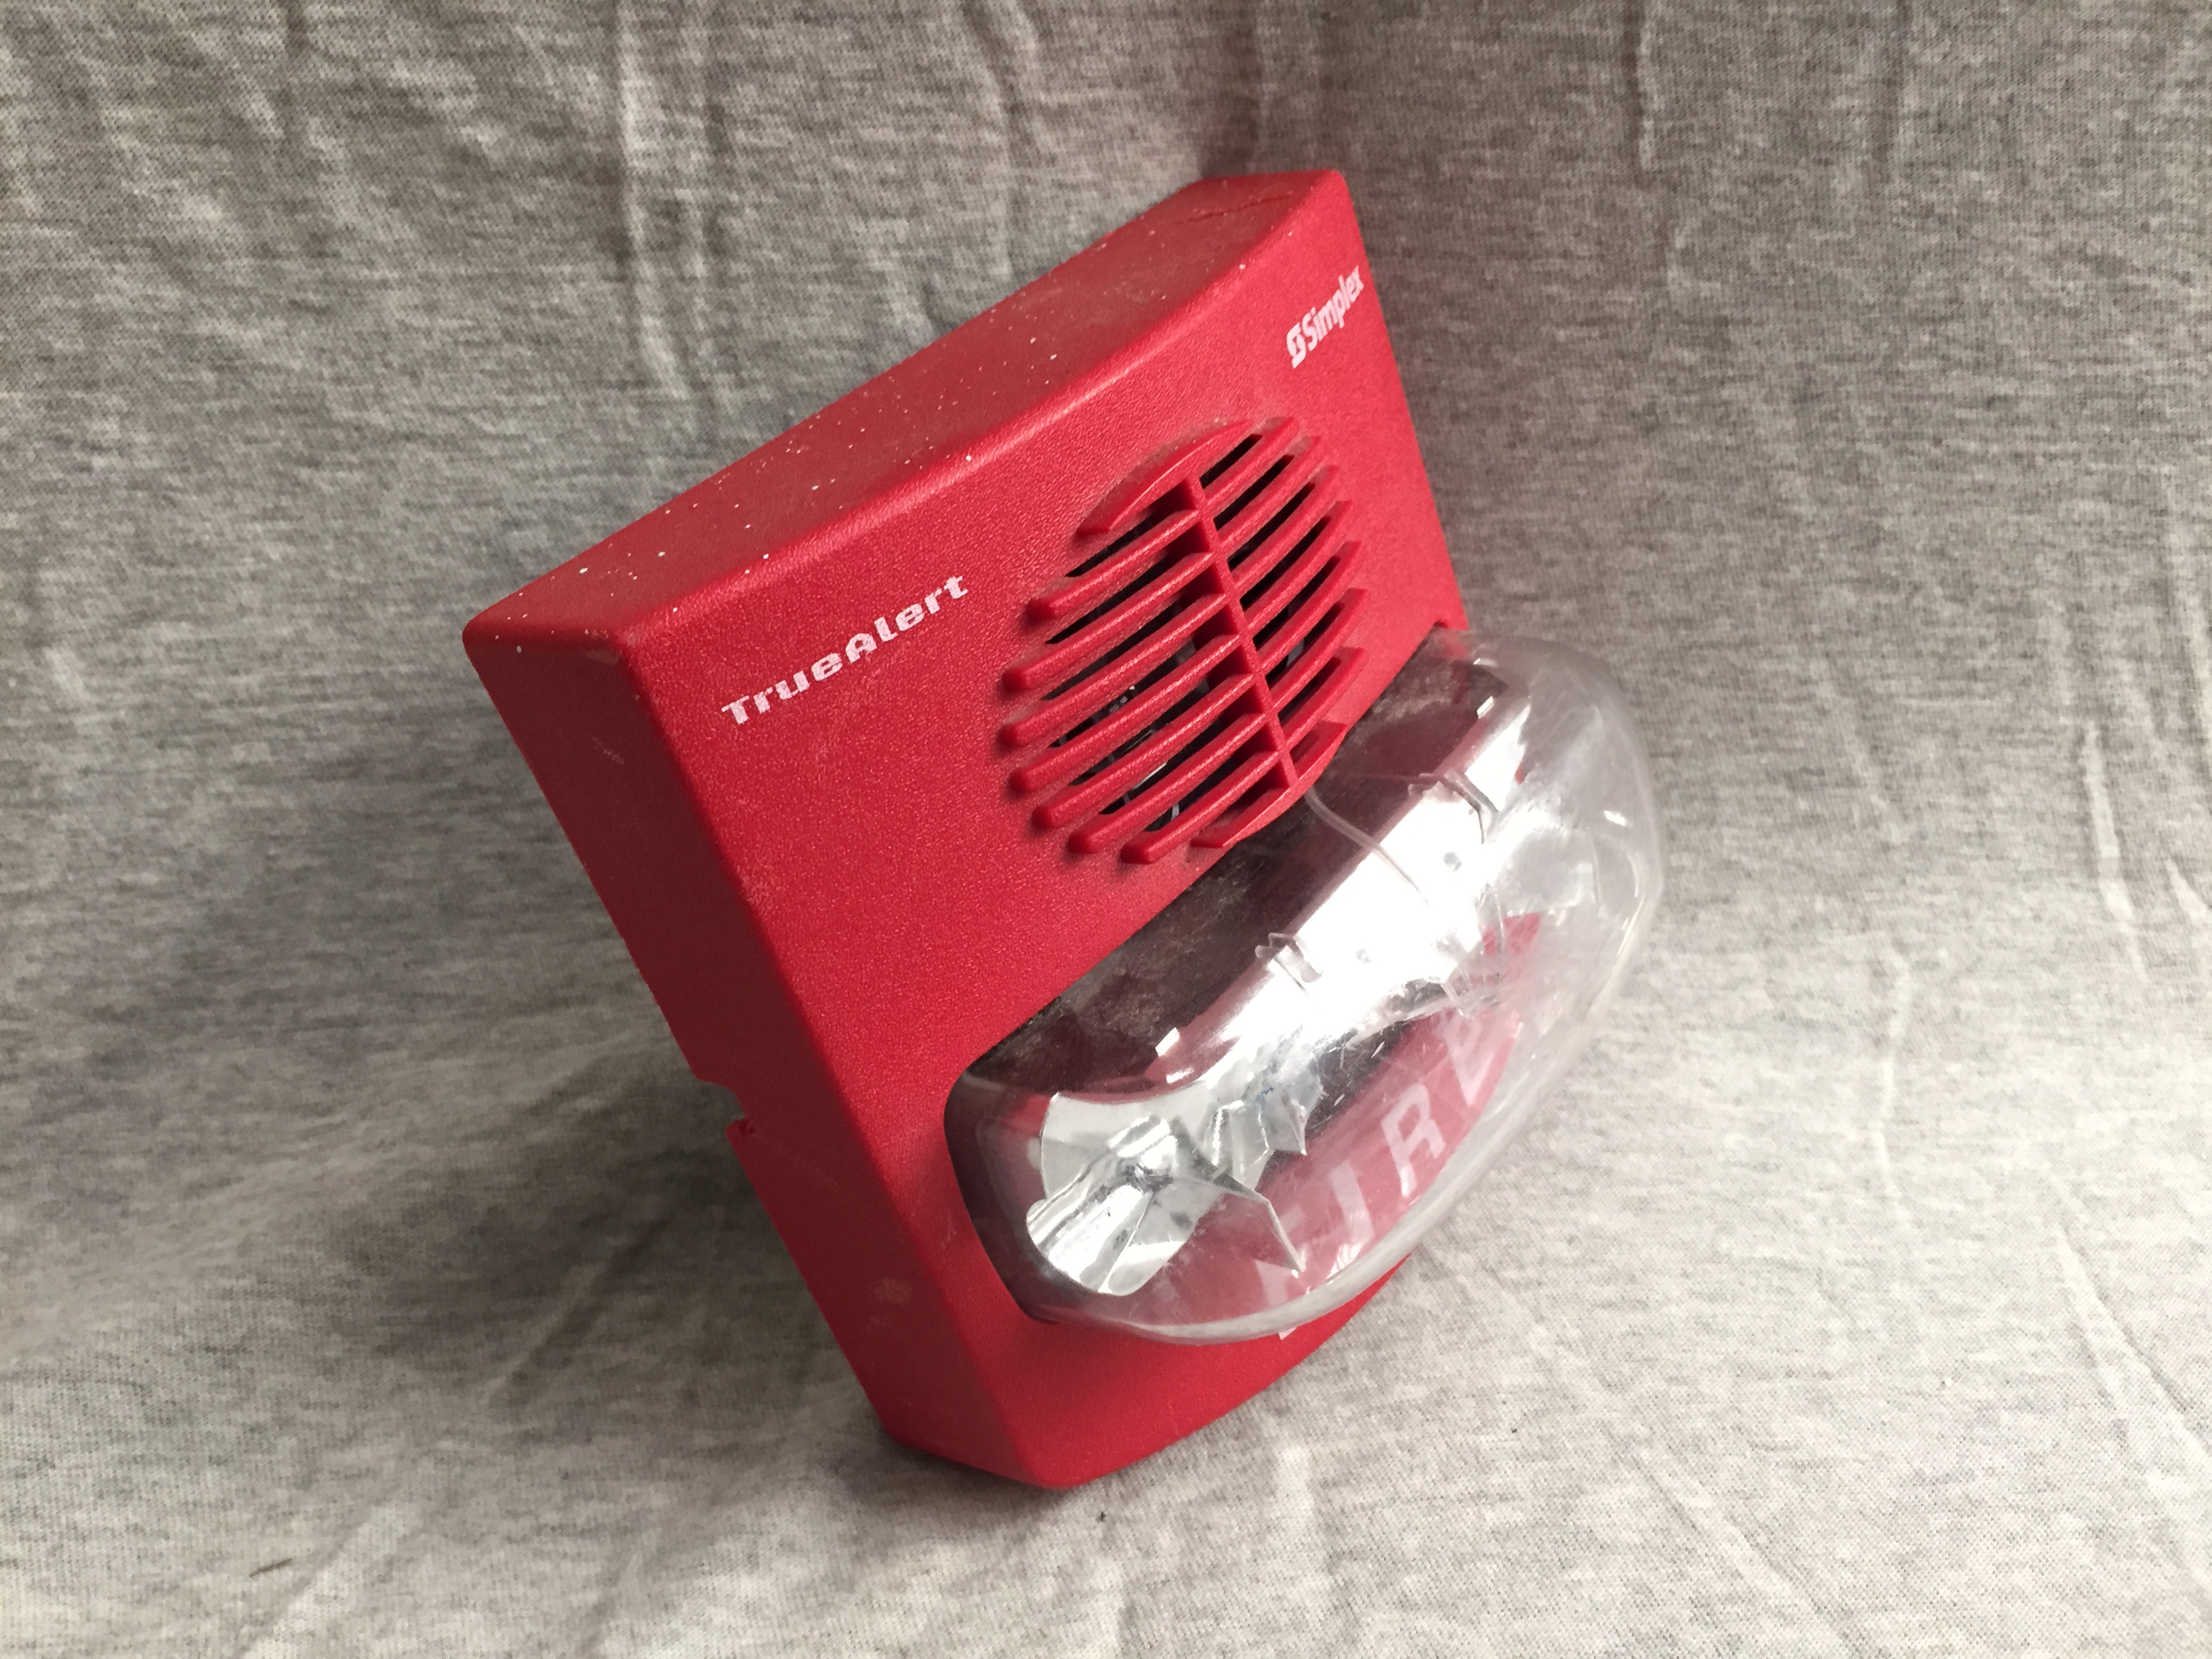 Simplex 4903-9417 - Fire Alarm Collection, Information, Pictures, and ...